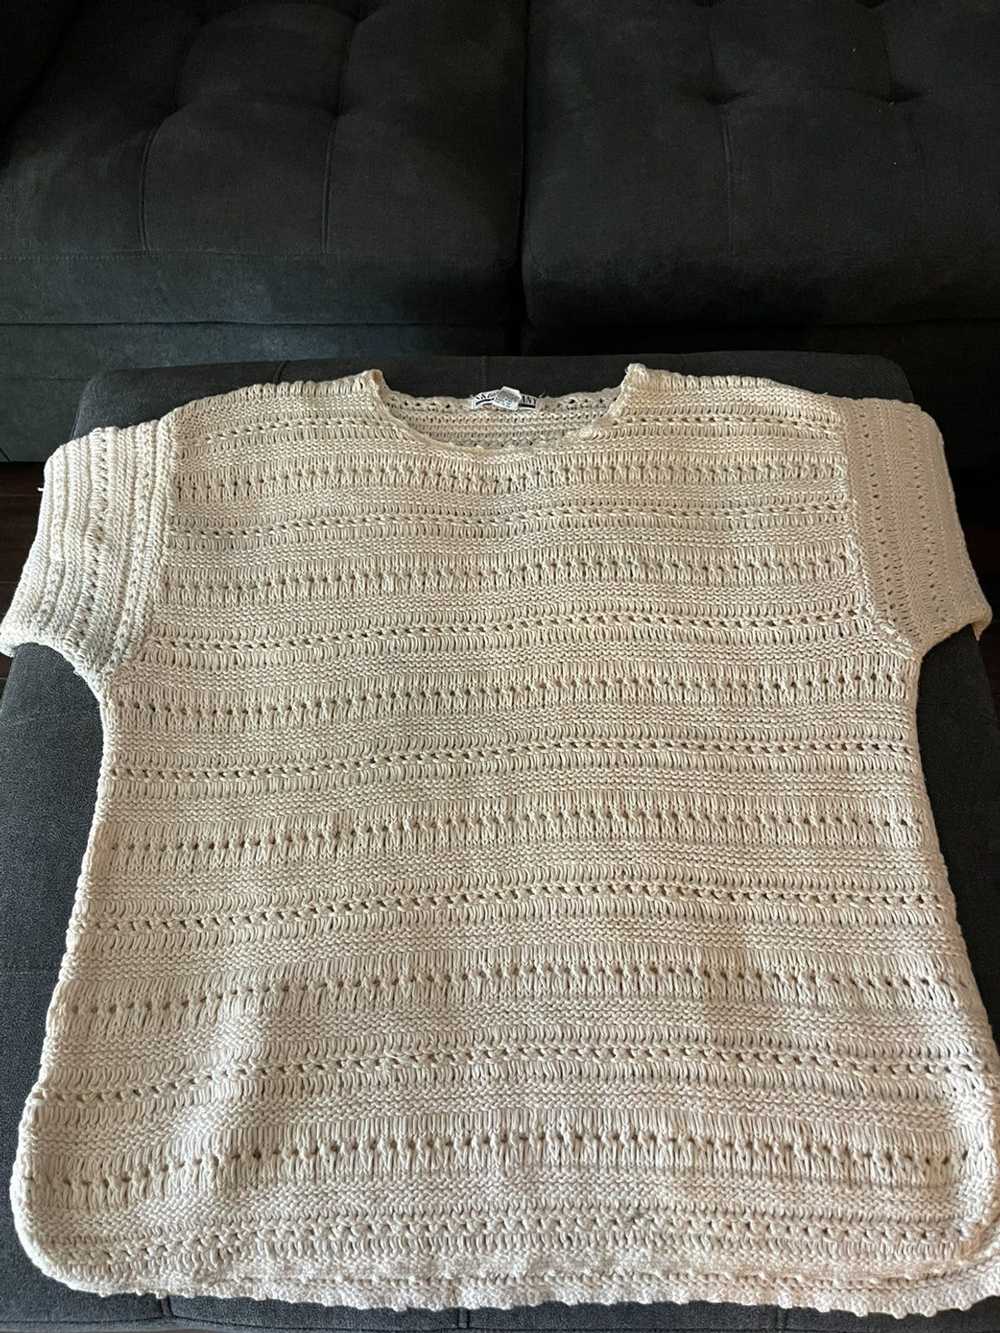 Other × Vintage White Knitted sweater - image 3